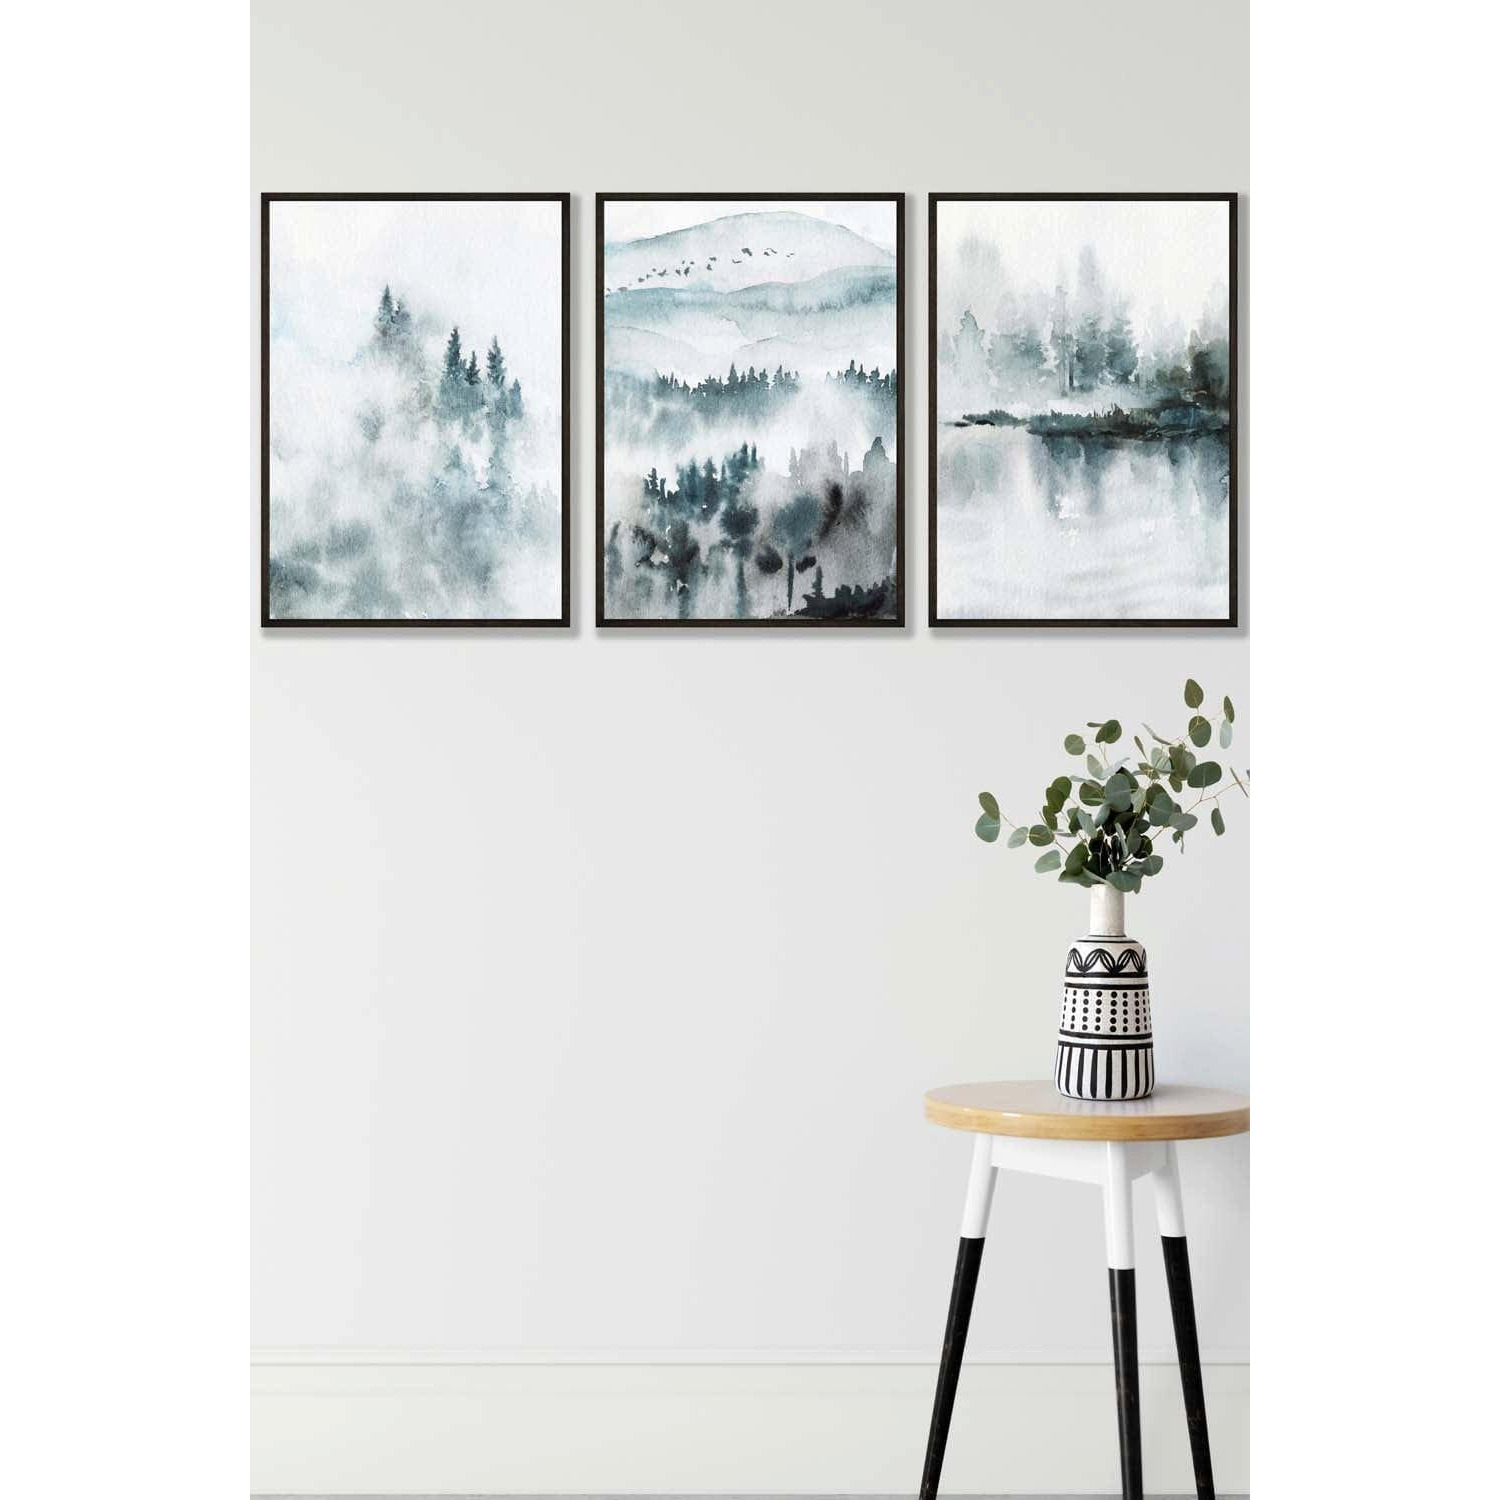 Set of 3 Black Framed Teal Blue Abstract Forest Lake Wall Art - image 1